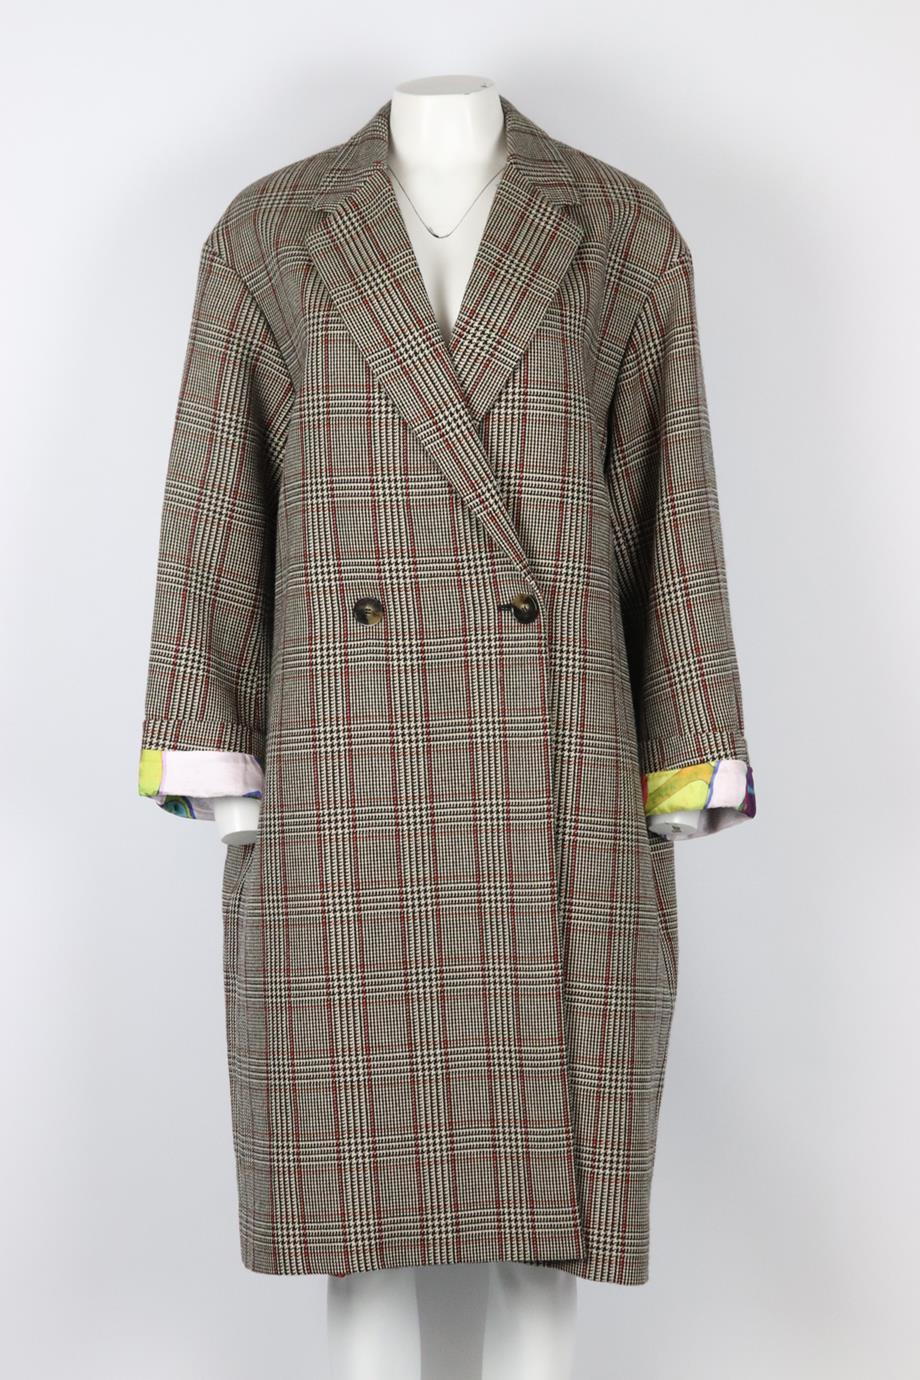 Stella McCartney + The Beatles double breasted checked wool coat. Multicoloured. Long sleeve, v-neck. Button fastening at front. 100% Wool; 100% viscose. Size: IT 46 (UK 14, US 10, FR 42). Shoulder to shoulder: 19 in. Bust: 46 in. Waist: 48 in.